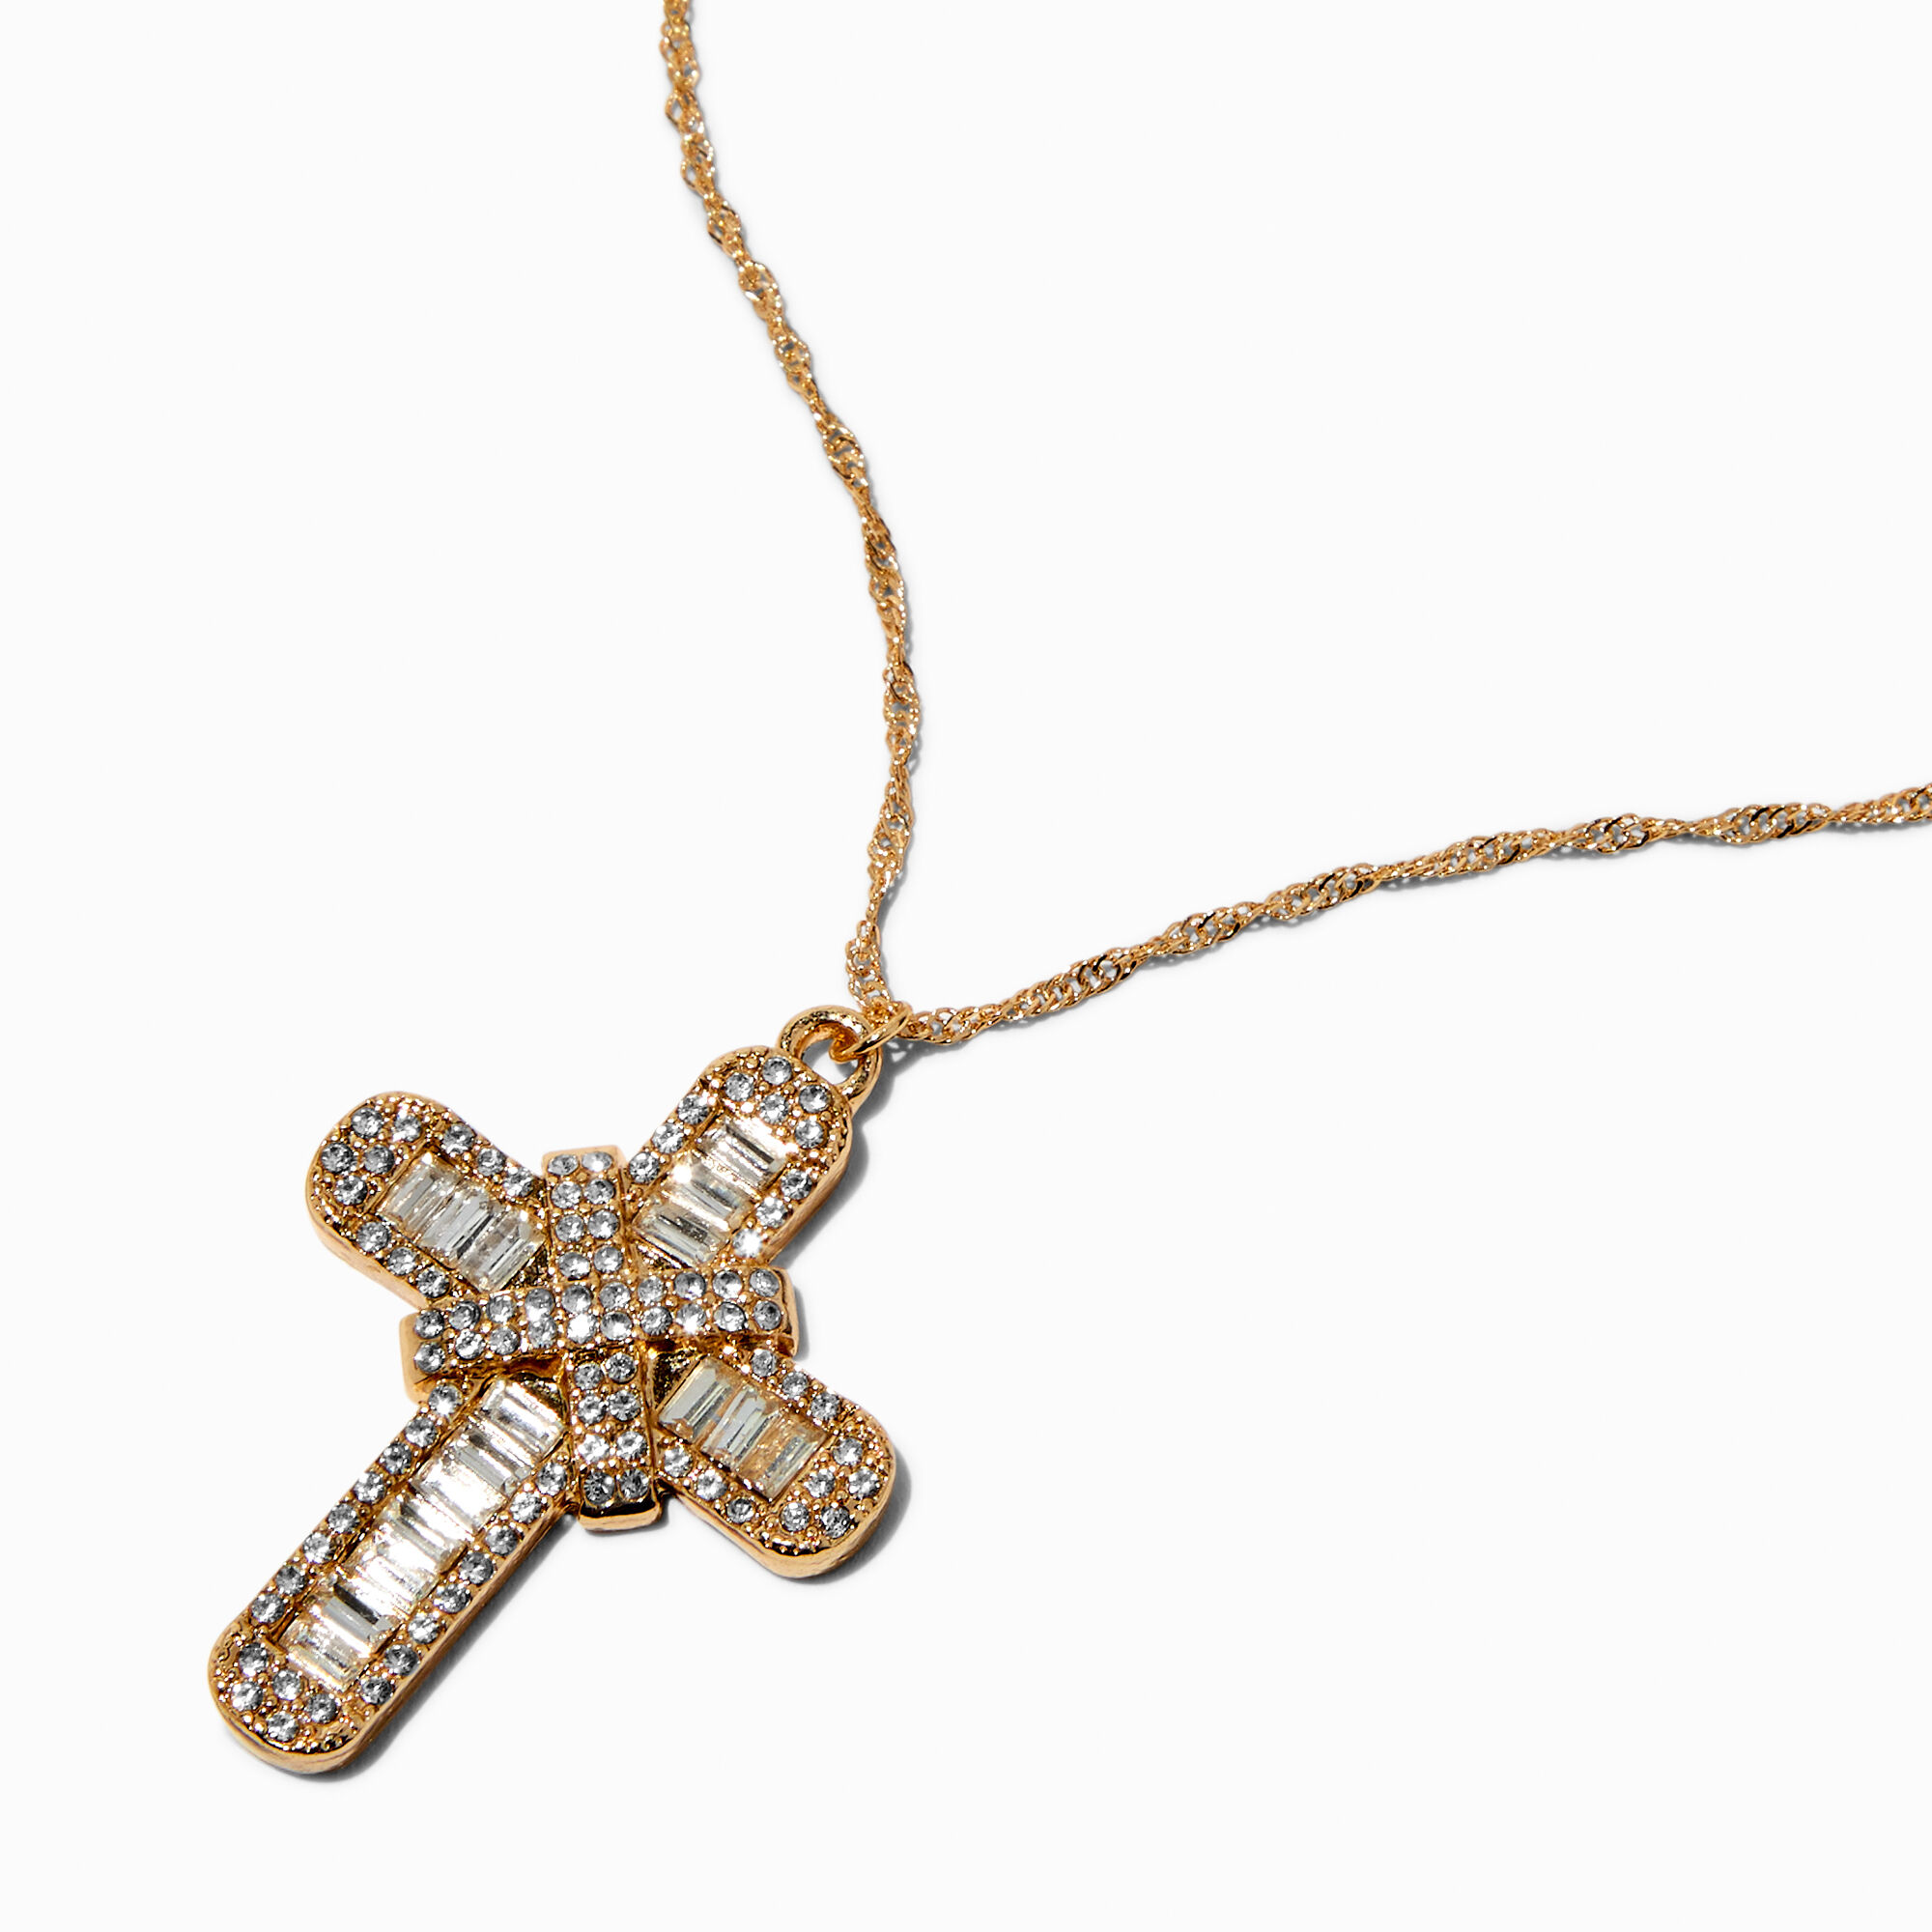 View Claires Tone Crystal Cross Pendant Necklace Gold information